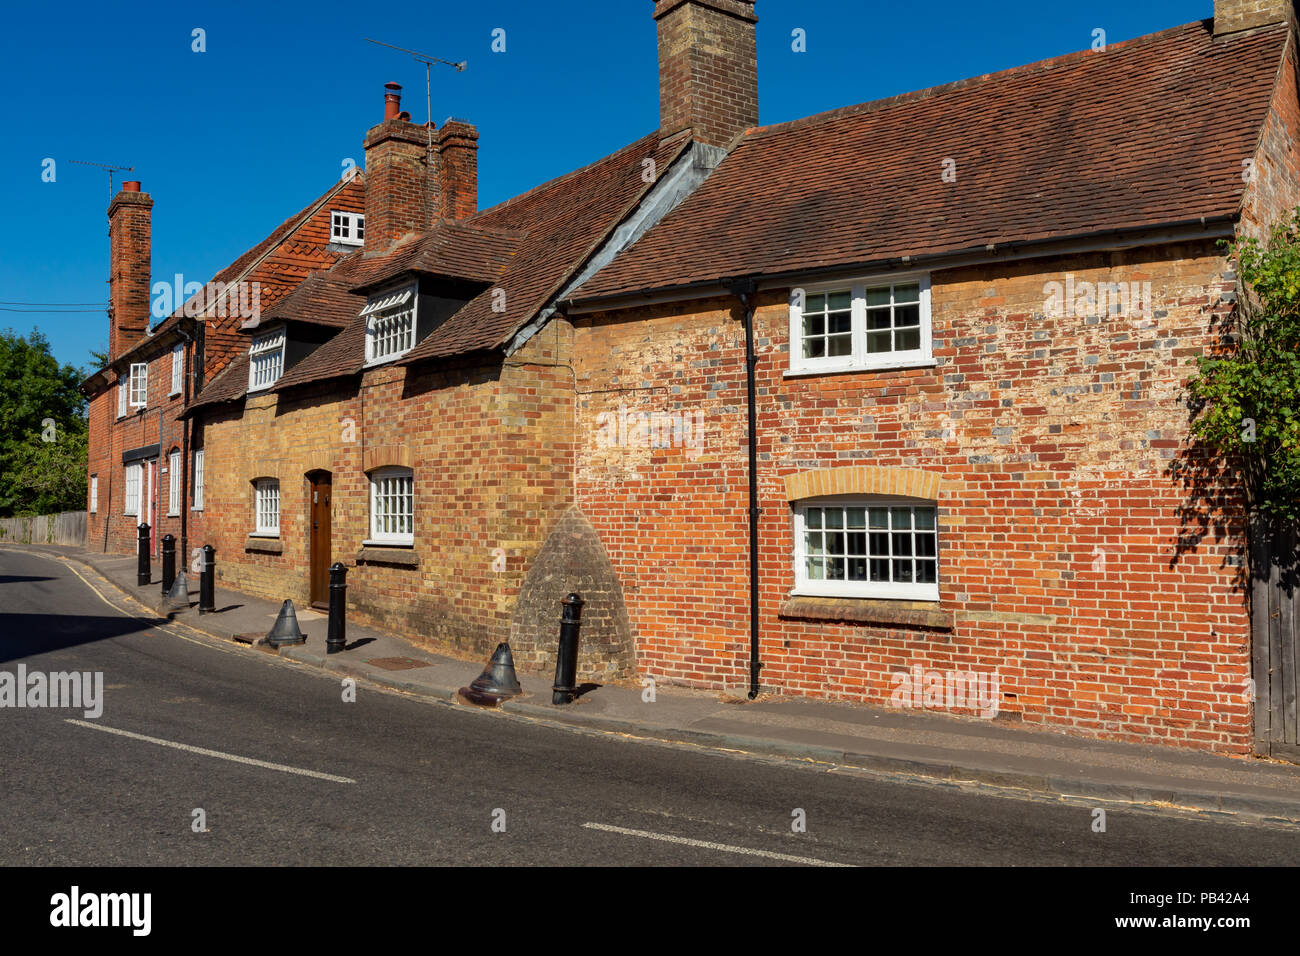 Beaulieu Hampshire England July 23, 2018 Old bric houses in a village street Stock Photo